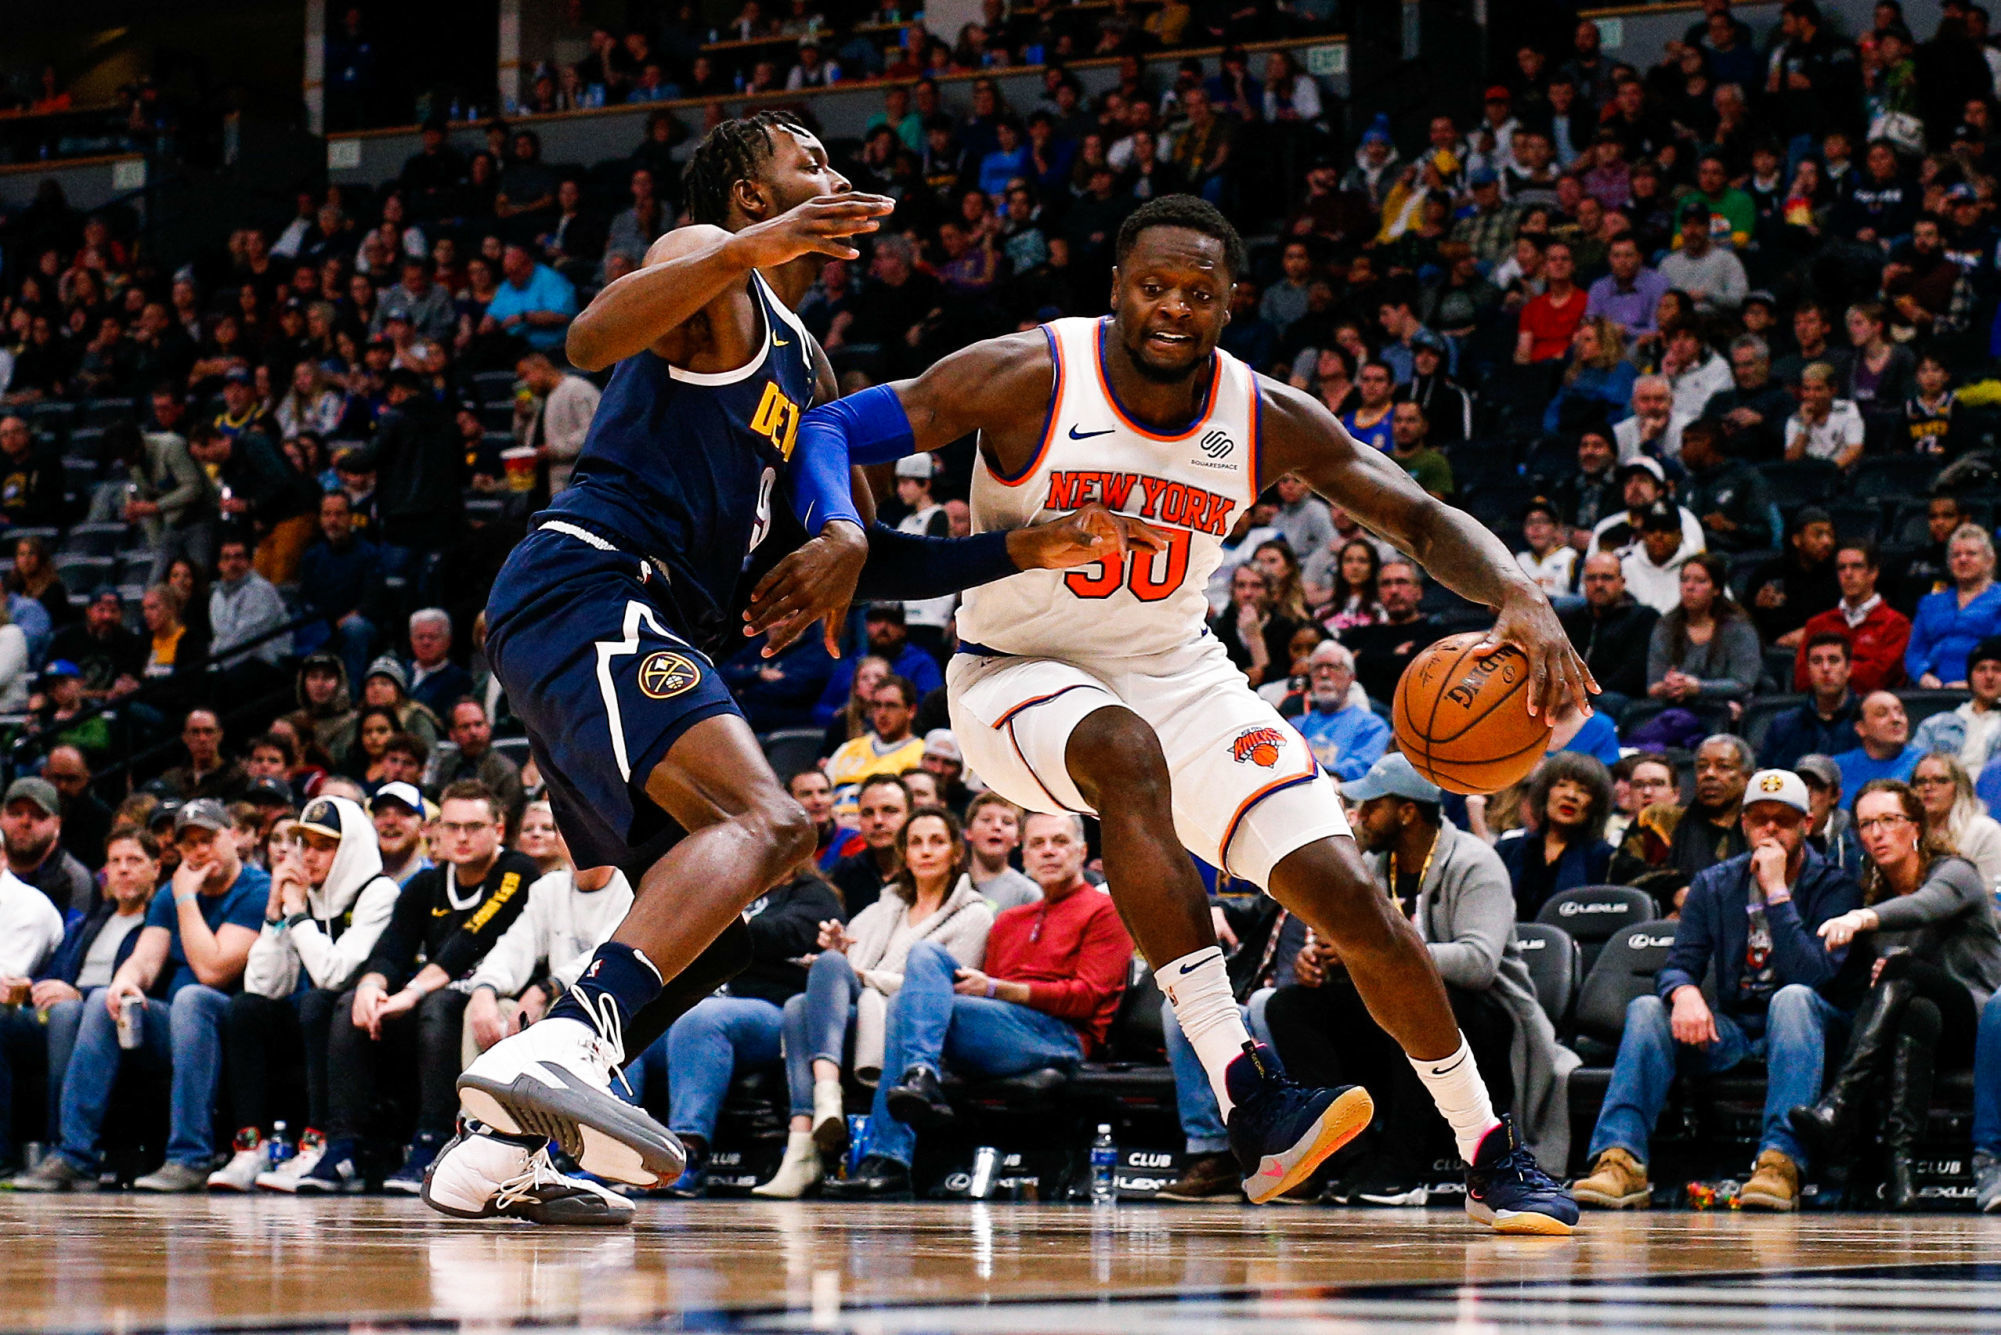 Dec 15, 2019; Denver, CO, USA; New York Knicks forward Julius Randle (30) dribbles the ball as Denver Nuggets forward Jerami Grant (9) defends in the third quarter at the Pepsi Center. Mandatory Credit: Isaiah J. Downing-USA TODAY Sports/Sipa USA 

Photo by Icon Sport - Jerami GRANT - Julius RANDLE - Pepsi Center - Denver (Etats Unis)